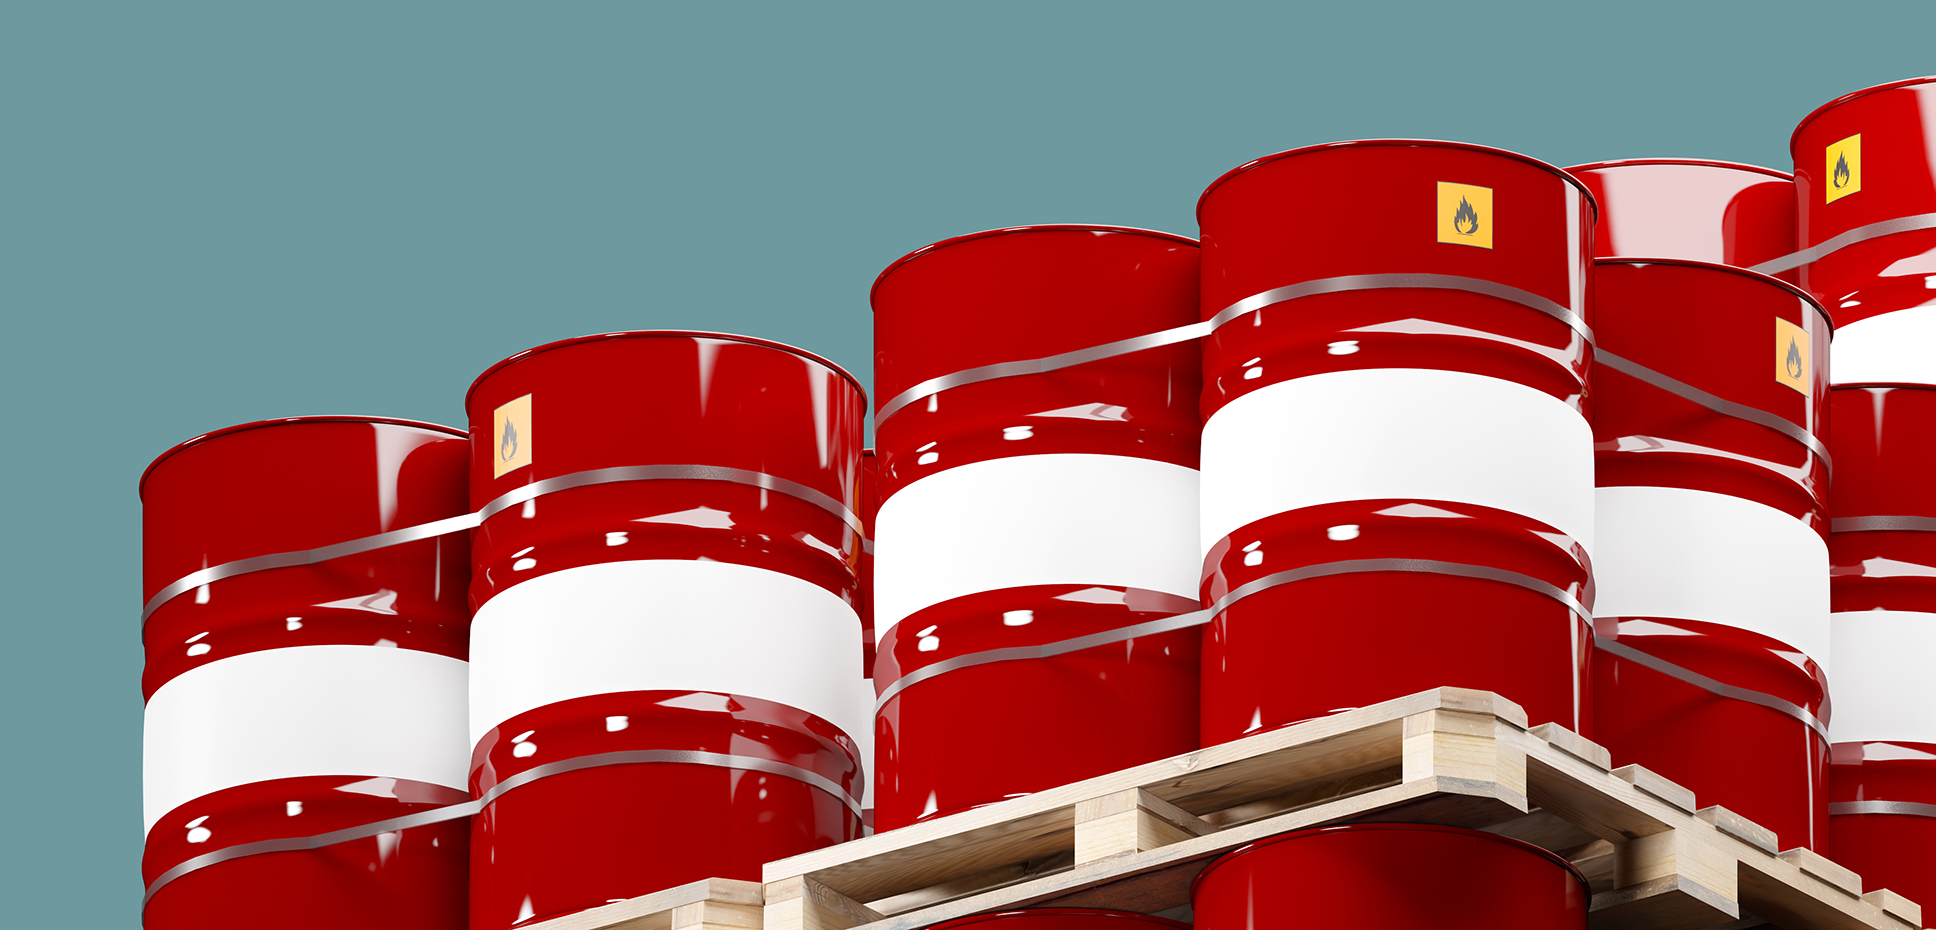 A large group of red barrels holding chemicals are stacked on pallets